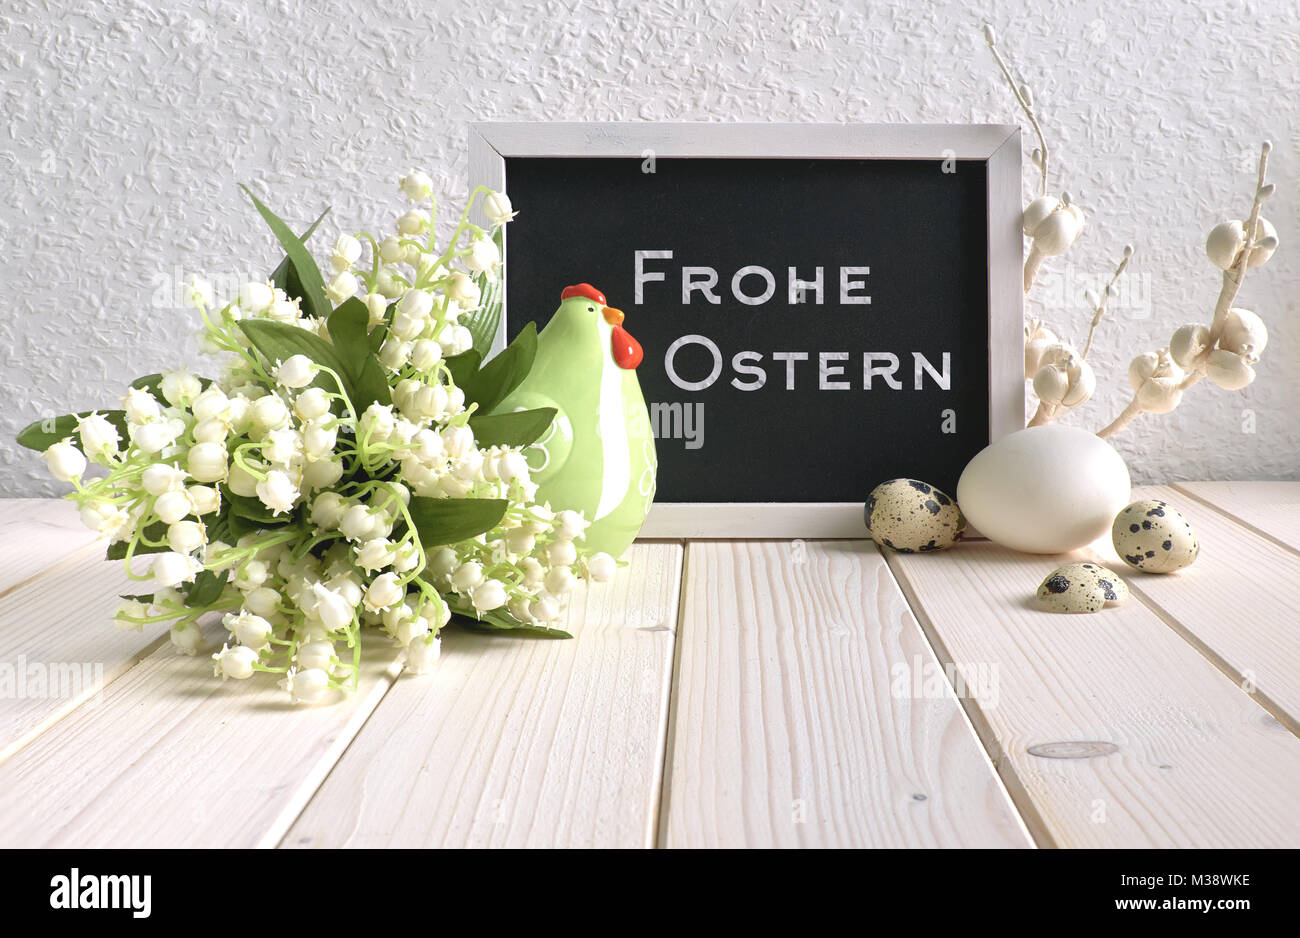 Easter composition with blackboard decorated with ceramic hen, eggs and and lily of the valley flowers, caption 'Frohe Ostern' means 'Happy Easter' in Stock Photo